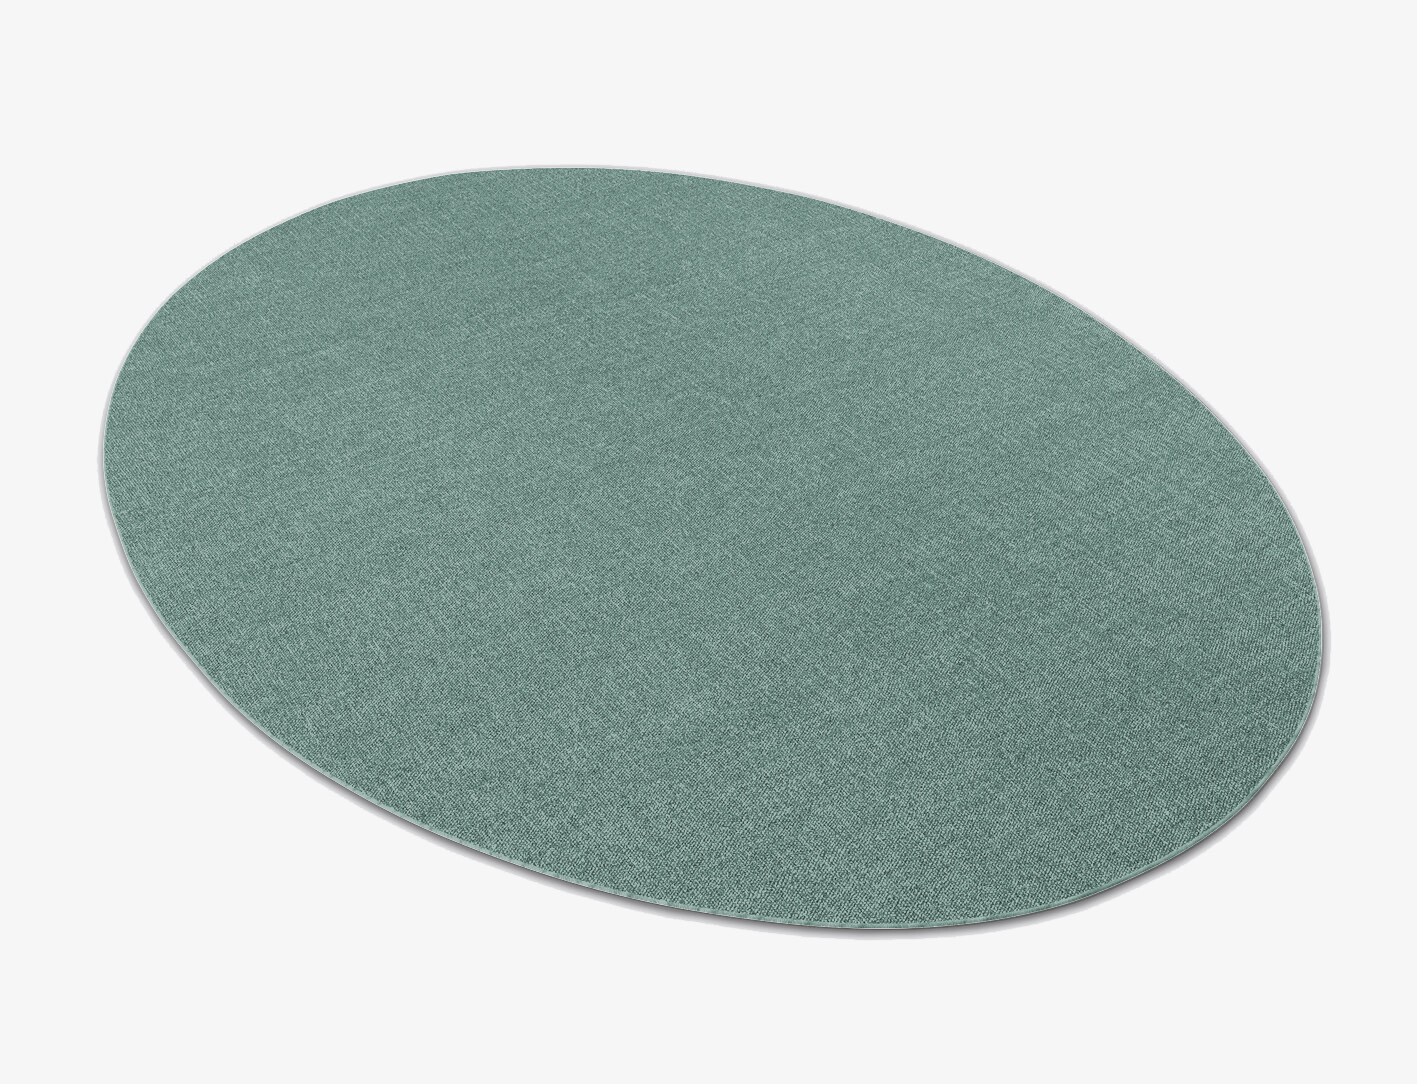 RA-CB08 Solid Colors Oval Outdoor Recycled Yarn Custom Rug by Rug Artisan